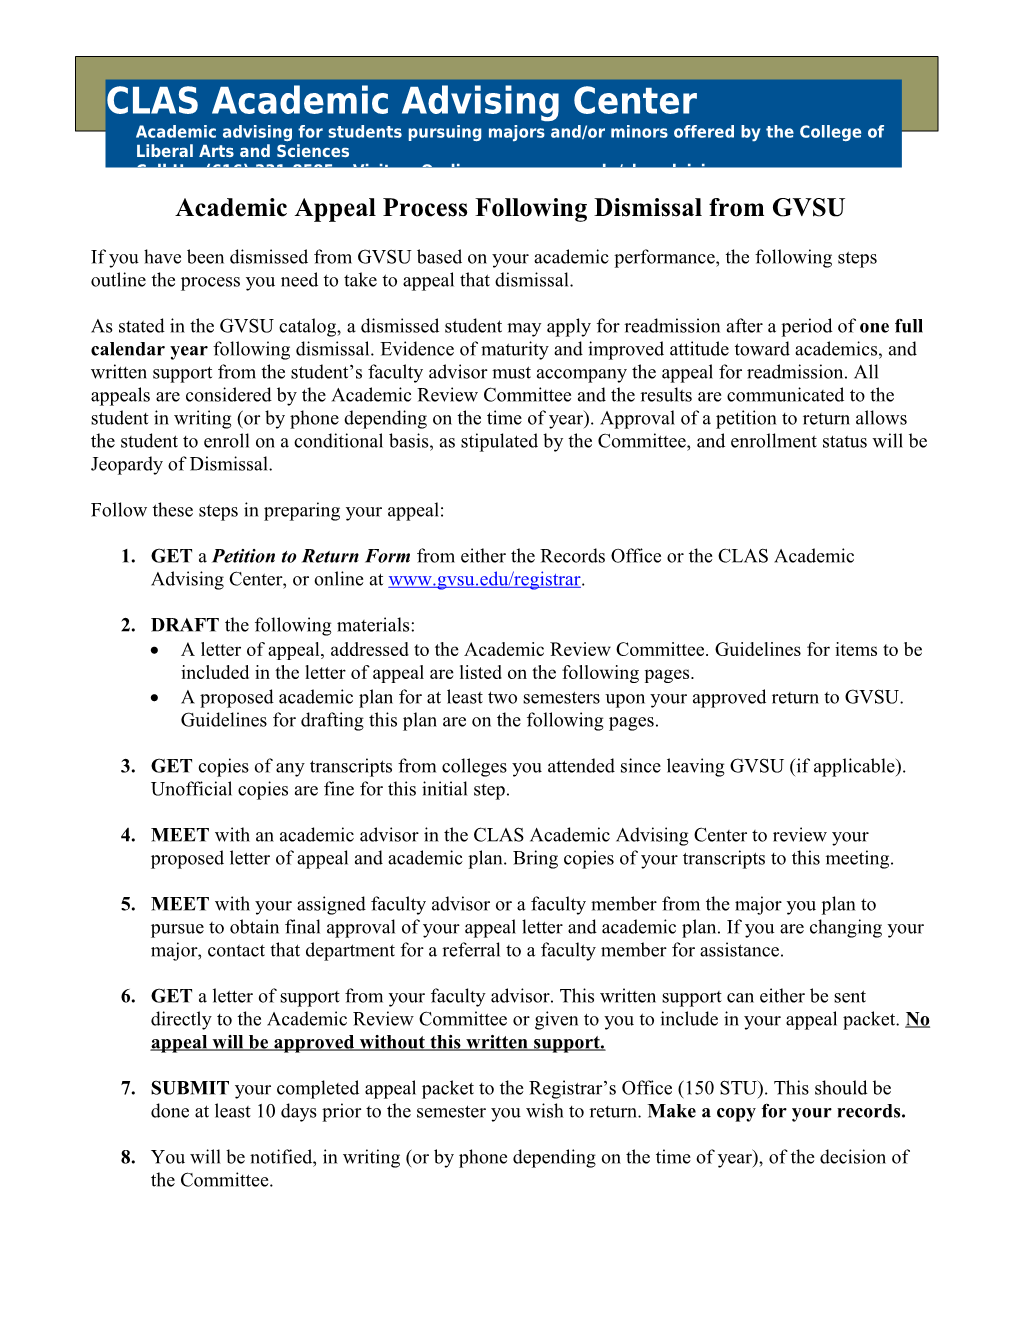 You MUST Follow the Steps Outlined Below When Submitting an Appeal to the Academic Review